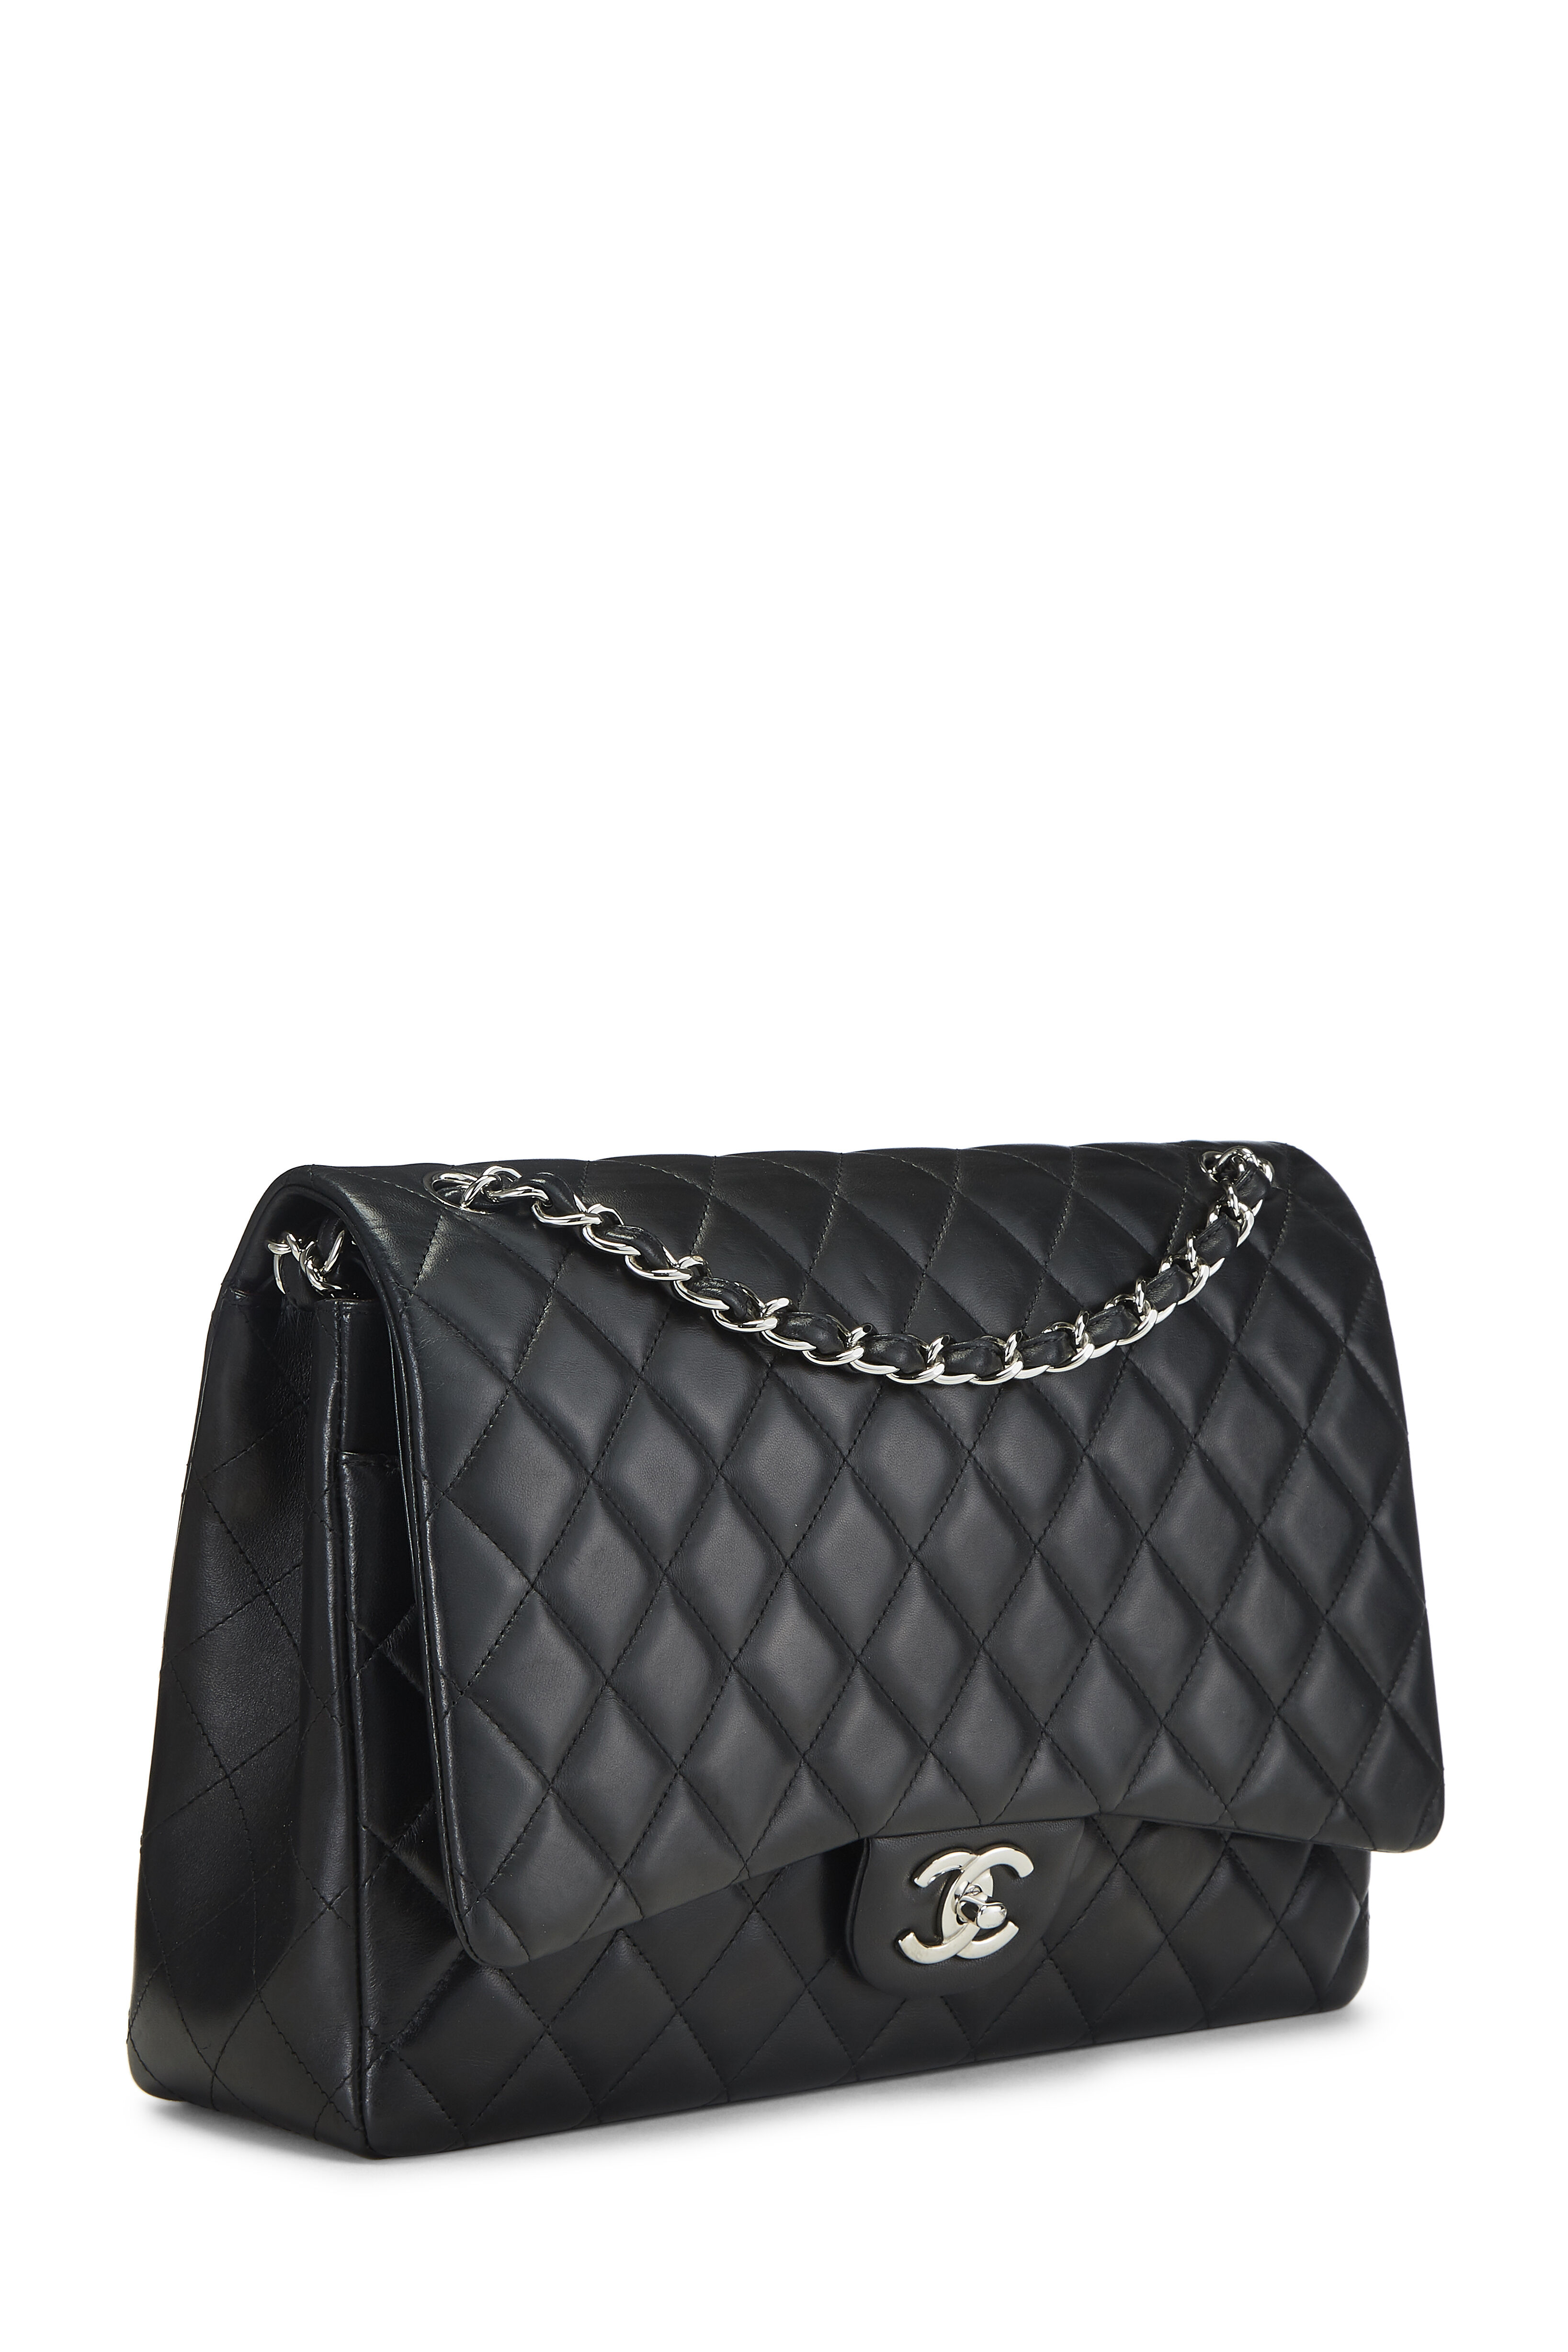 CHANEL Lambskin Classic Maxi Double Flap Bag Dark Blue Our style note to  keep you chic with this exquisite staple for festive…